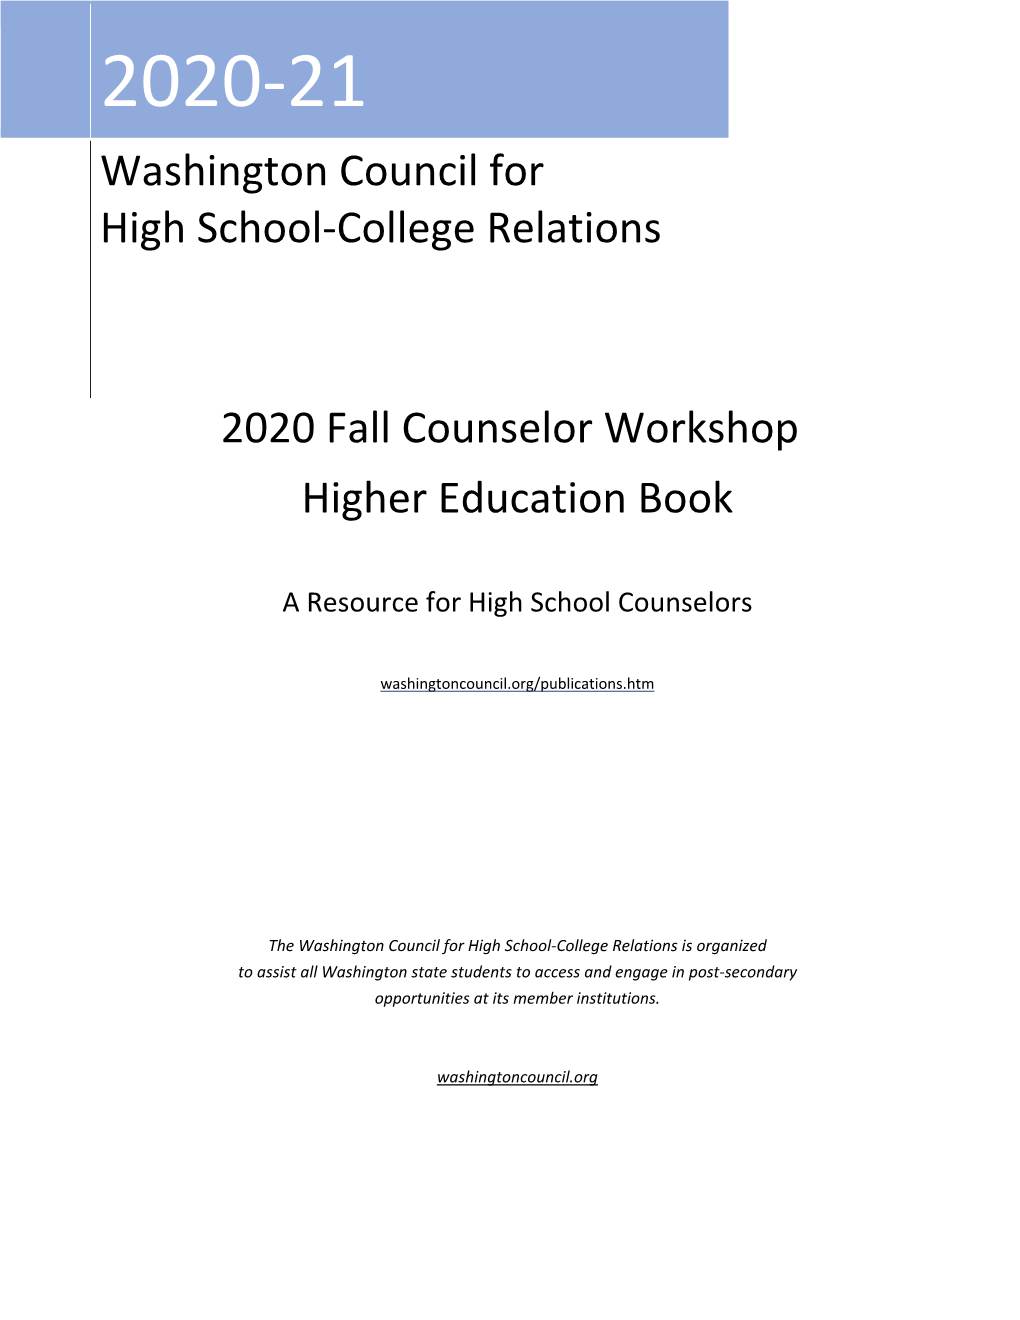 2020‐21 Washington Council for High School‐College Relations